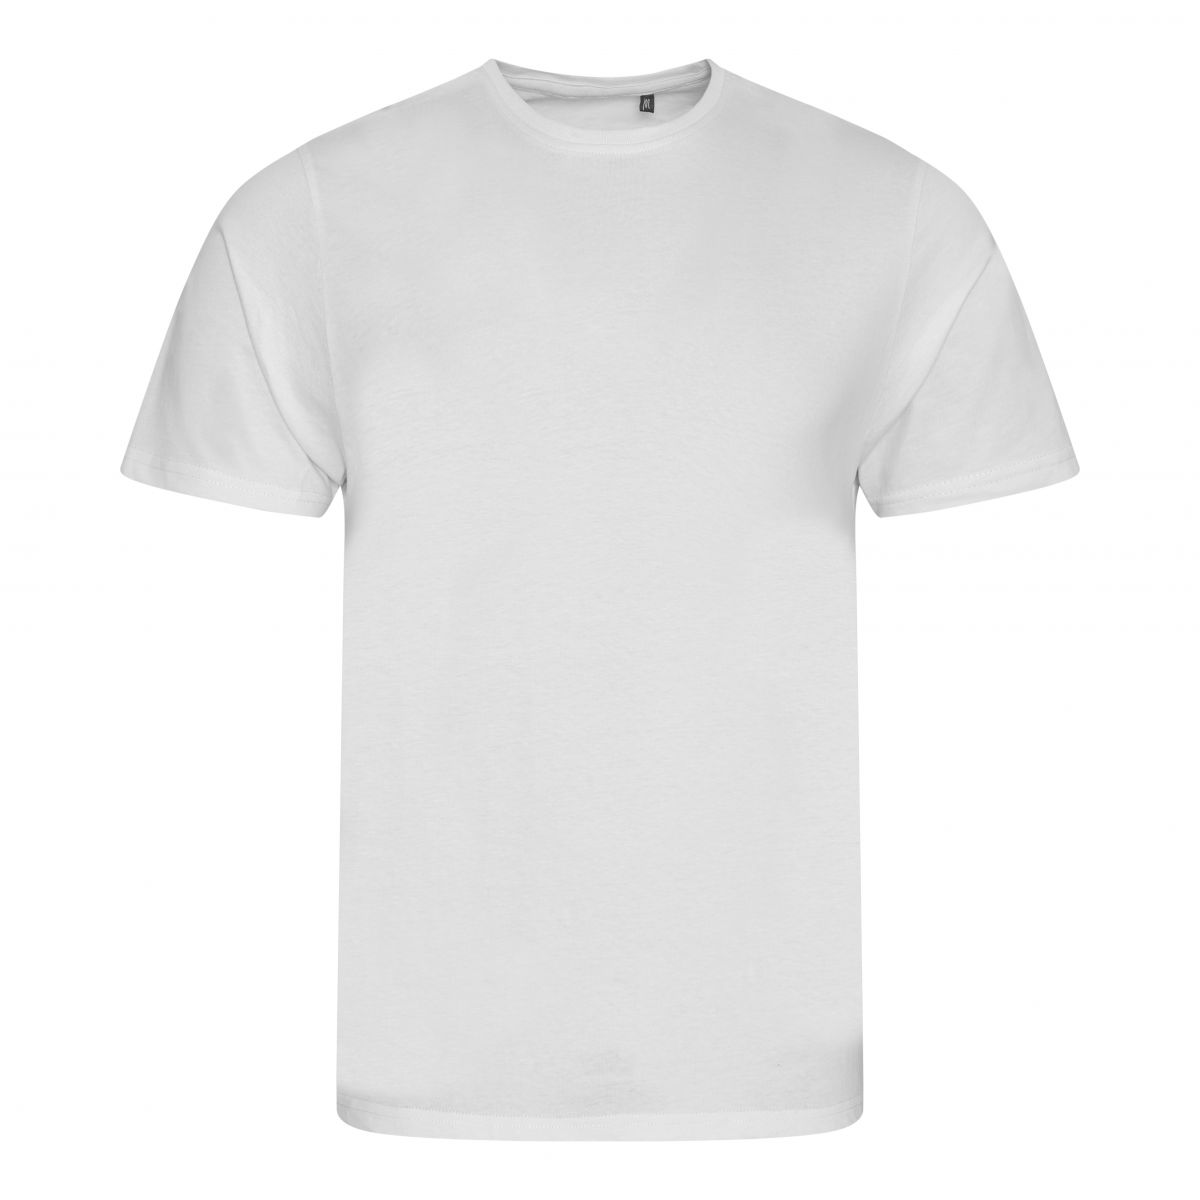 Organic Cotton Tee Shirts for Men and Teenagers in Navy or White - The ...